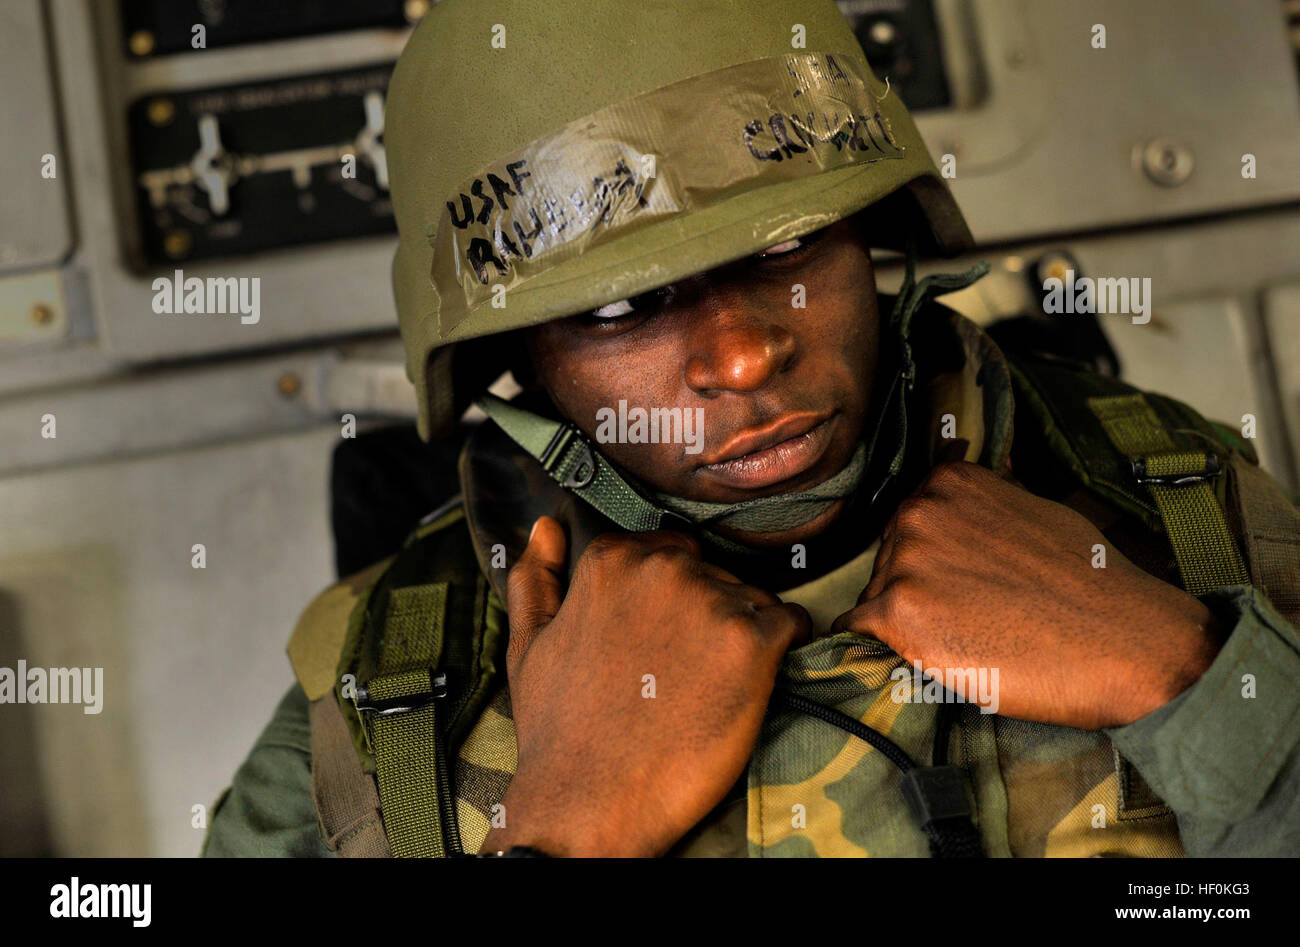 U.S. Air Force Senior Airman Raheem Crockett, C-17 Globemaster III Loadmaster, awaits further scenario instructions during an Operational Readiness Evaluation (ORE), Gulfport, Miss., October 28, 2011. Members of the 437th Airlift Wing, Joint Base Charleston, S.C., took part in the ORE, which was staged out of Gulfport. The ORE is intended to evaluate Joint Base Charleston's ability to 'take the fight to the enemy' and objectively measure mission effectiveness.  (U.S. Air Force Photo By: Staff Sgt. Clay Lancaster/Released) Flickr - DVIDSHUB - 437th AW Operational Readiness Evaluation (Image 8 o Stock Photo